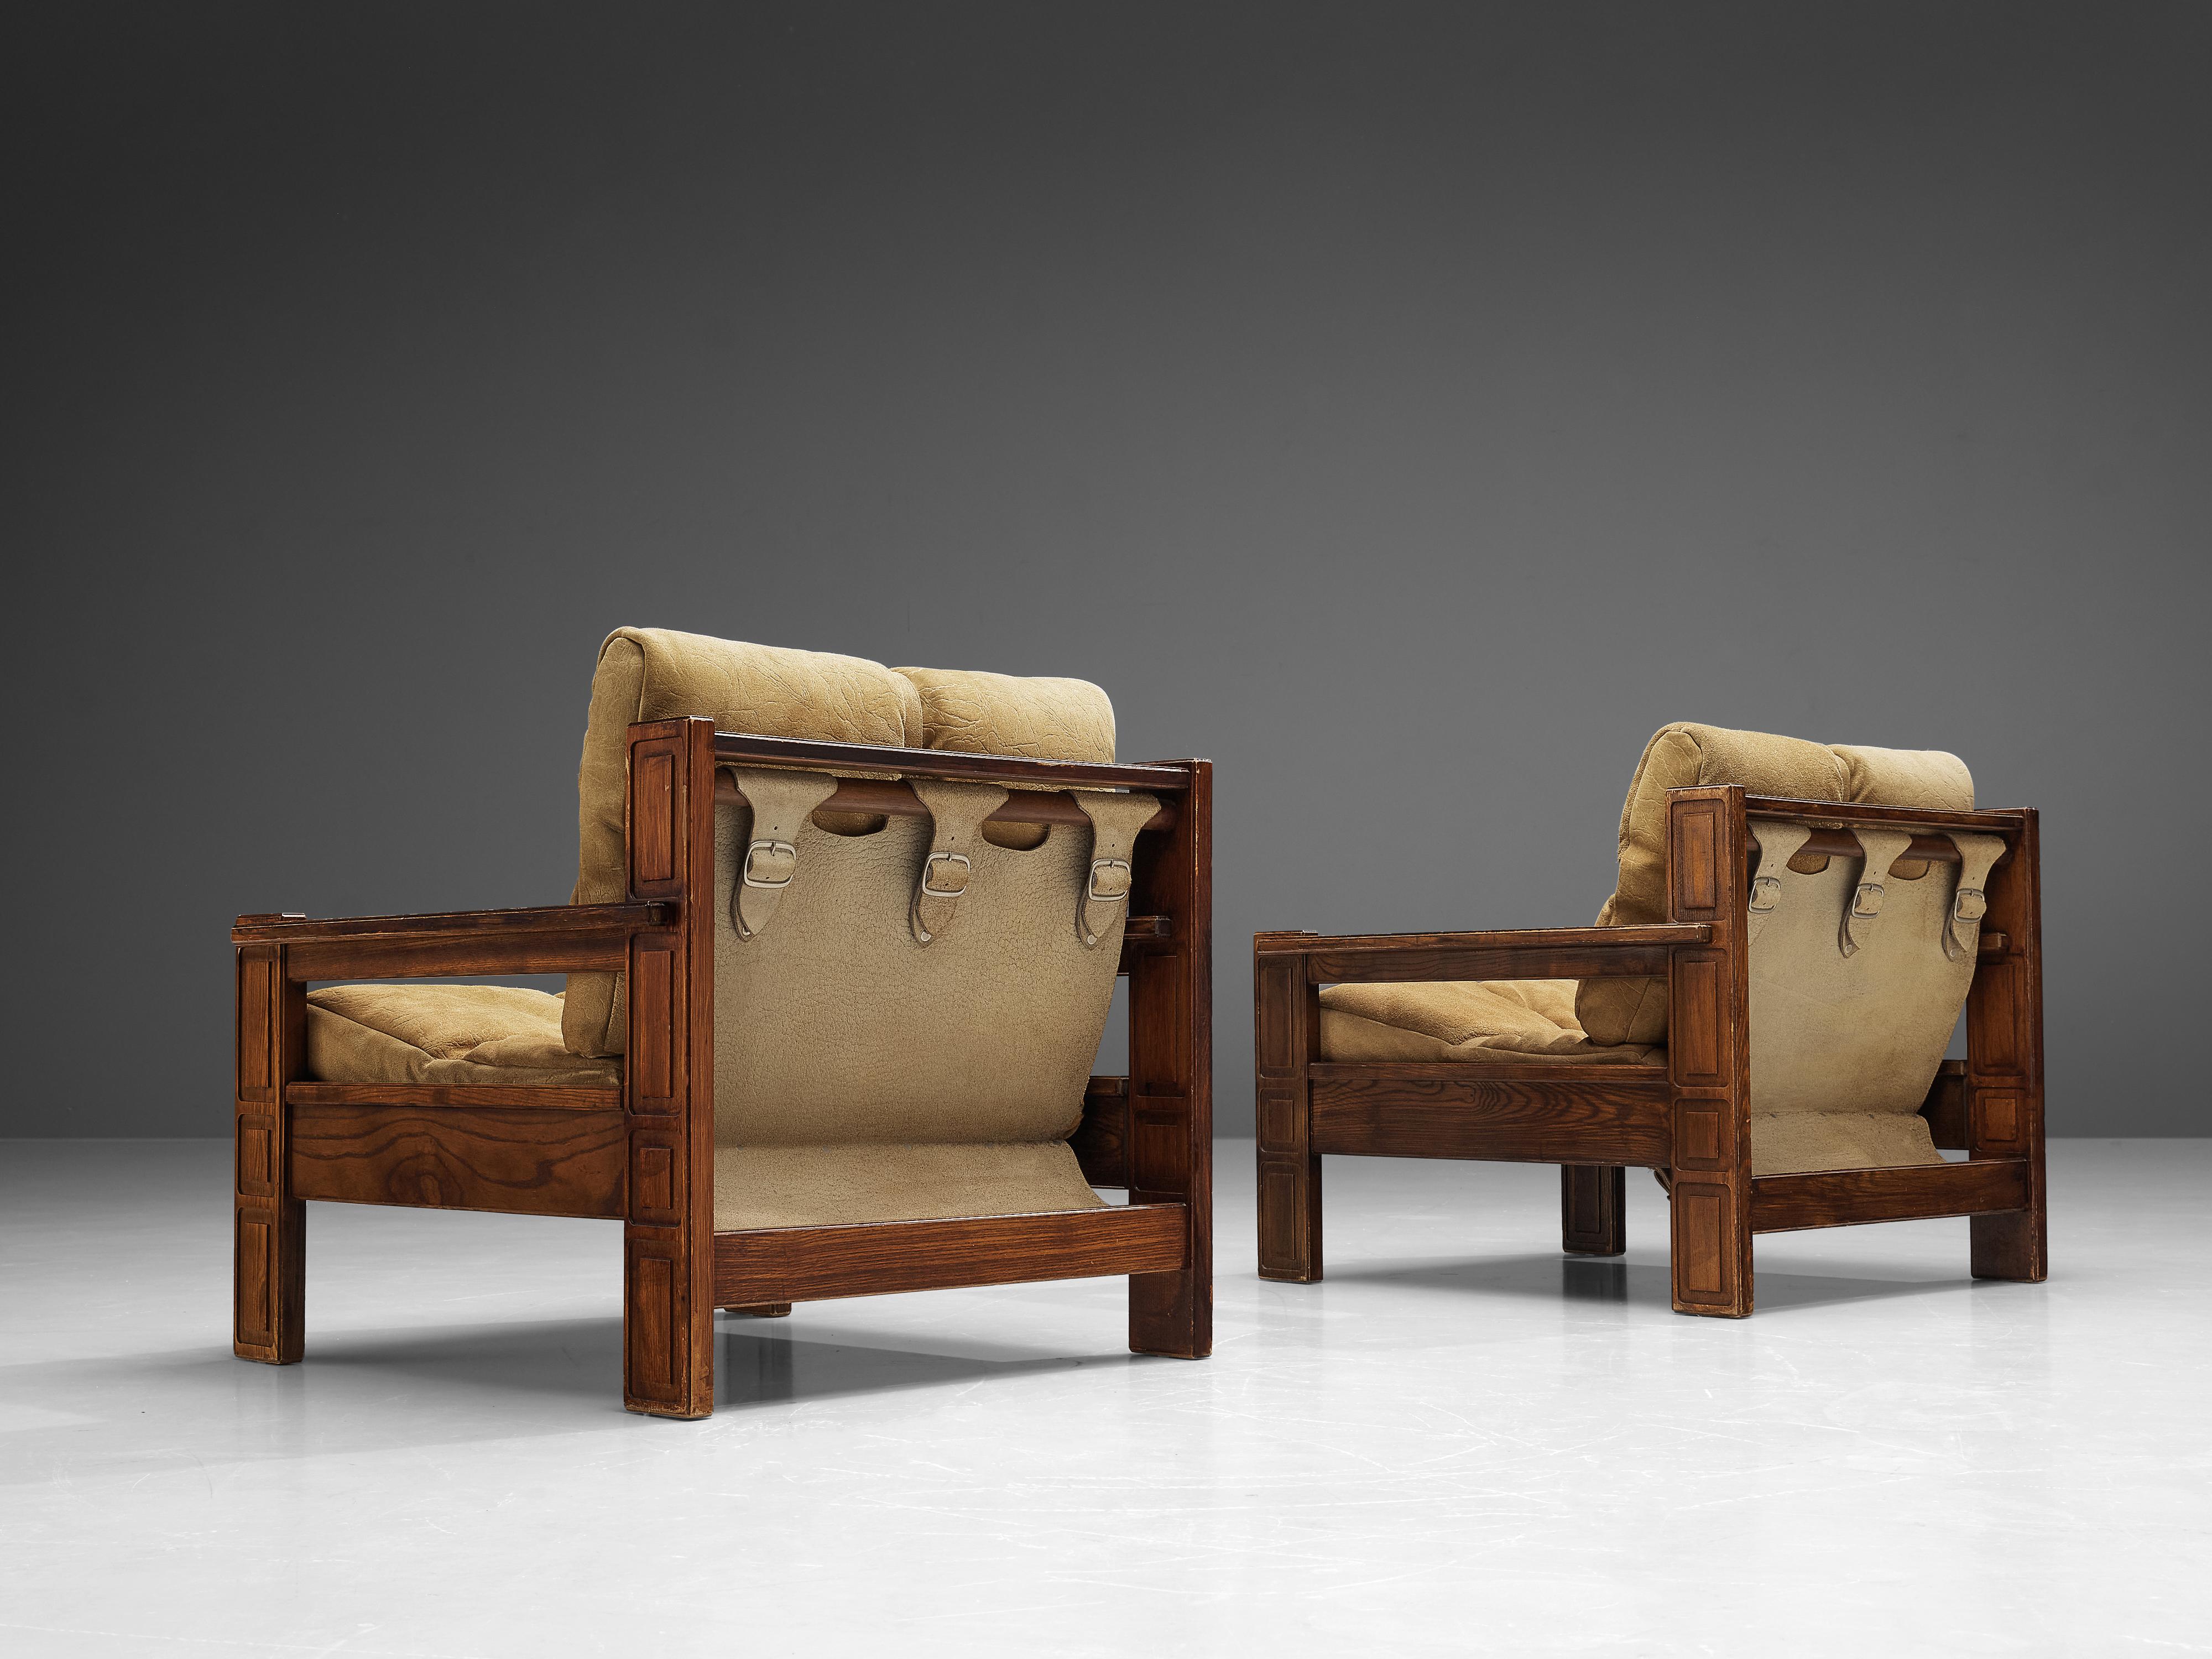 Carl Straub, lounge chairs, ash, suede, fabric, metal, Germany, 1970s

This pair of German lounge chairs bears multiple features. The first eye-catch are the two loose cushions in patinated suede. These are structured with a vertical and horizontal